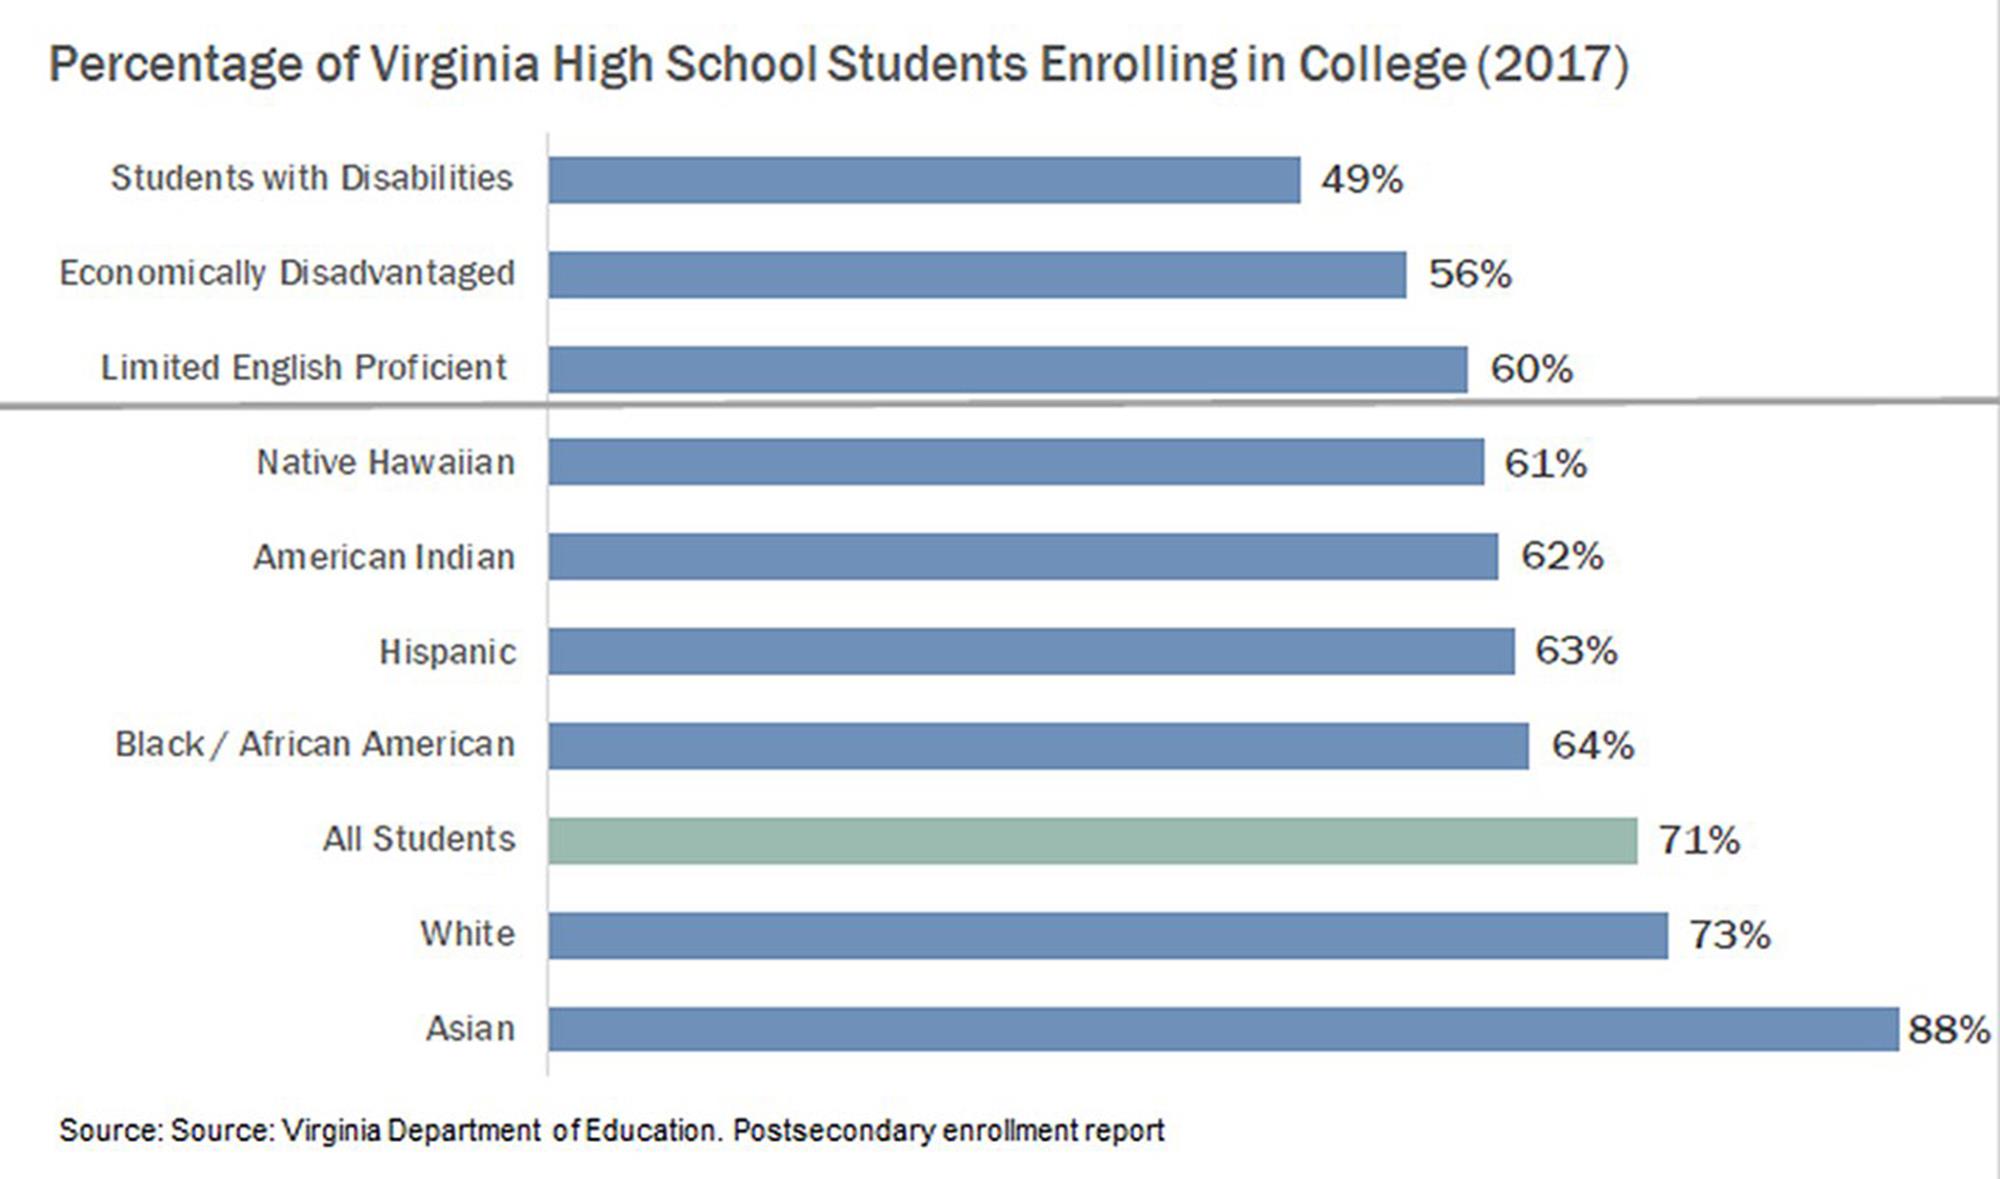 Percentage-of-VA-high-school-students-enrolled-in-college